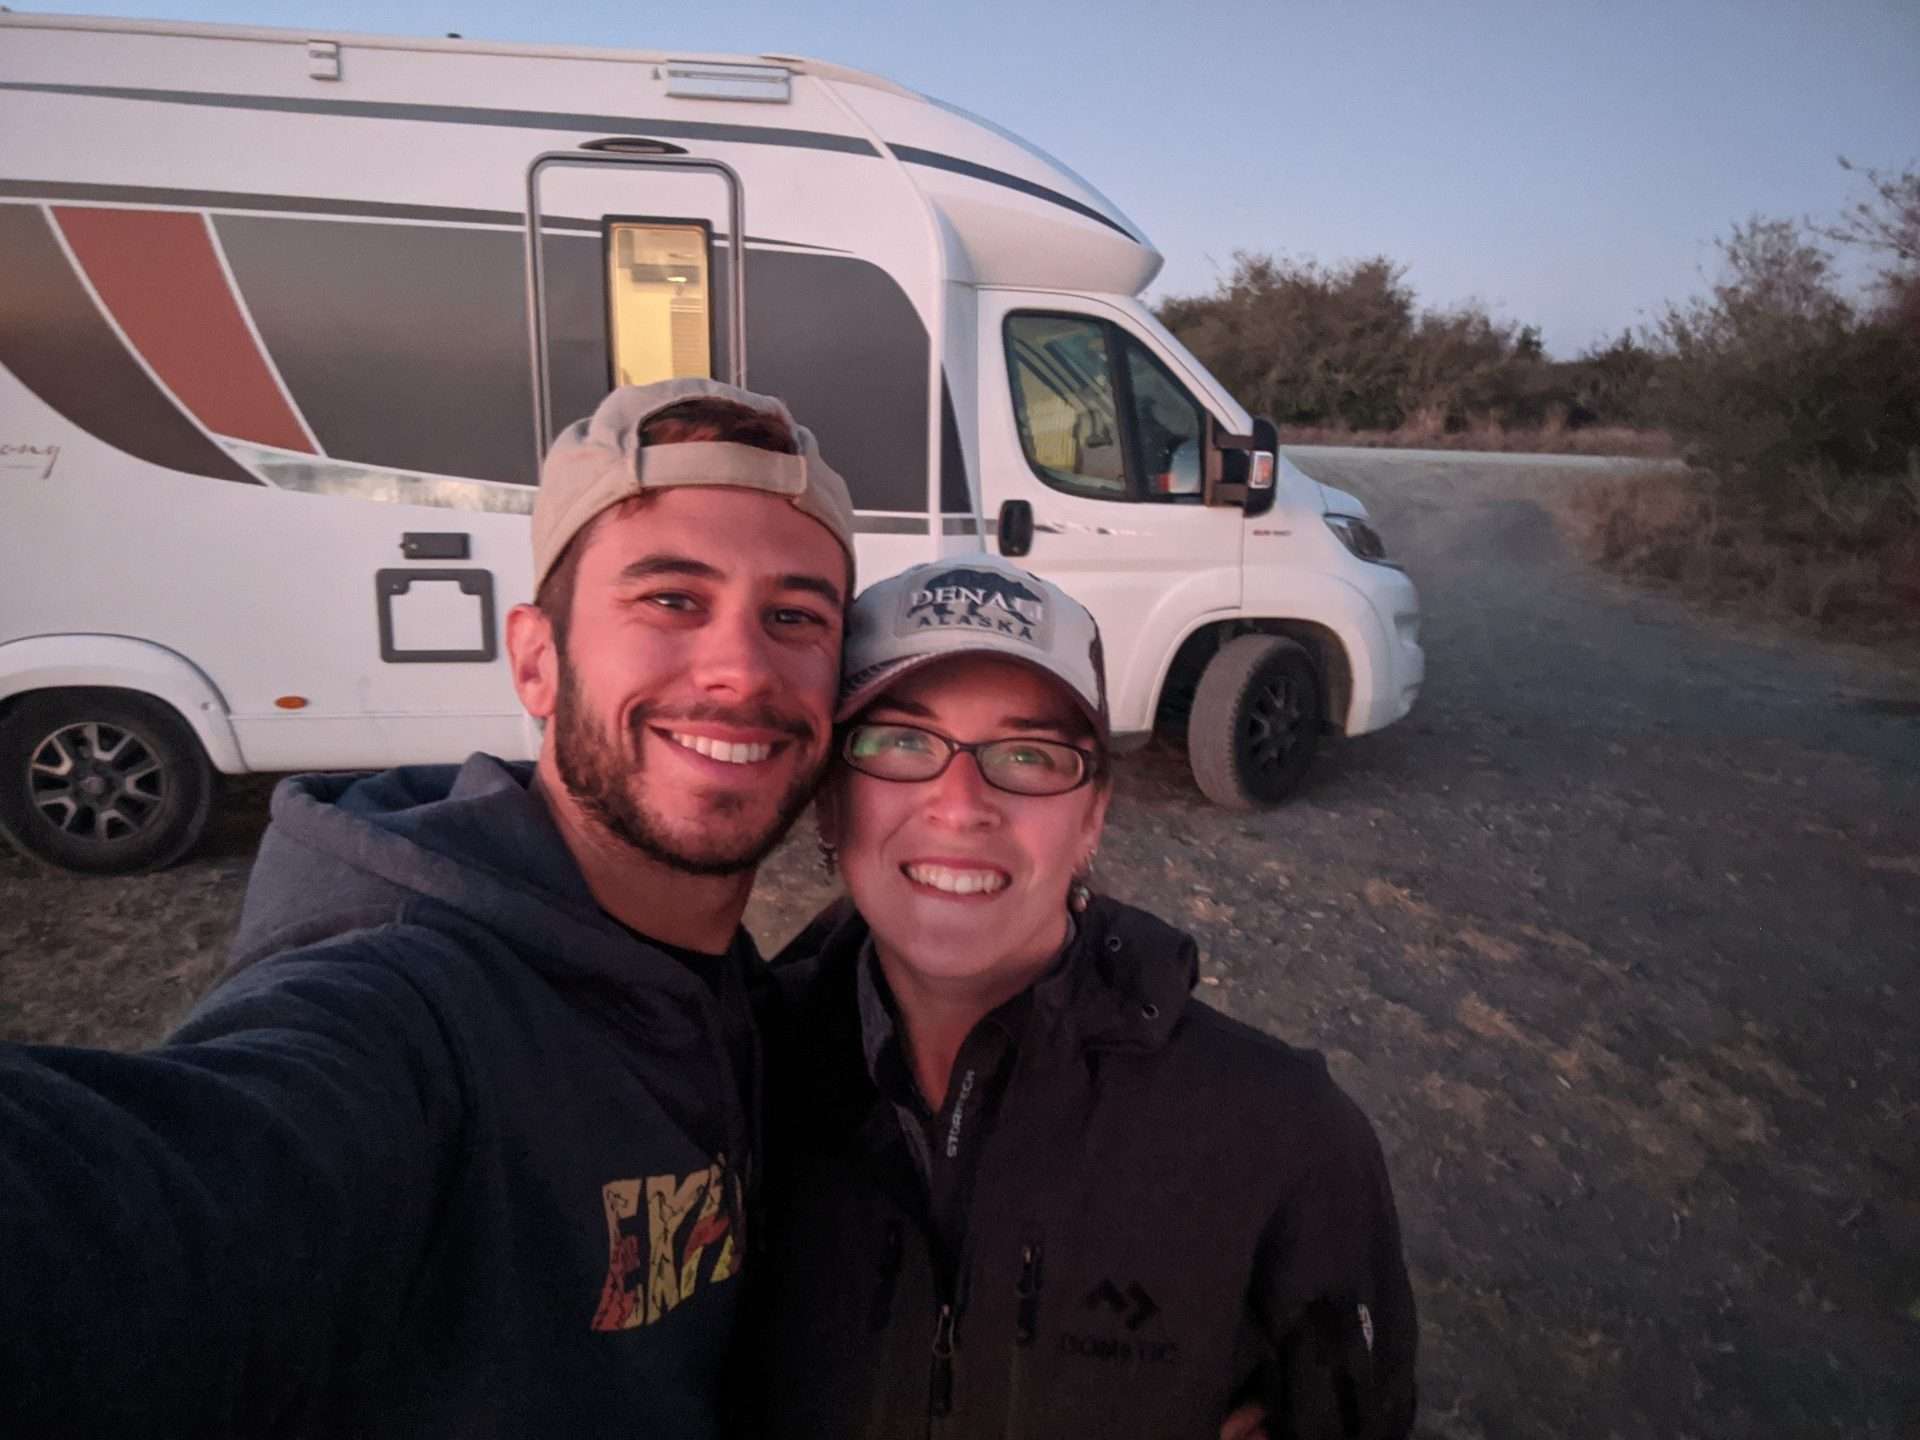 Tom and Cait from Mortons on the Move selfie in front of camper van.